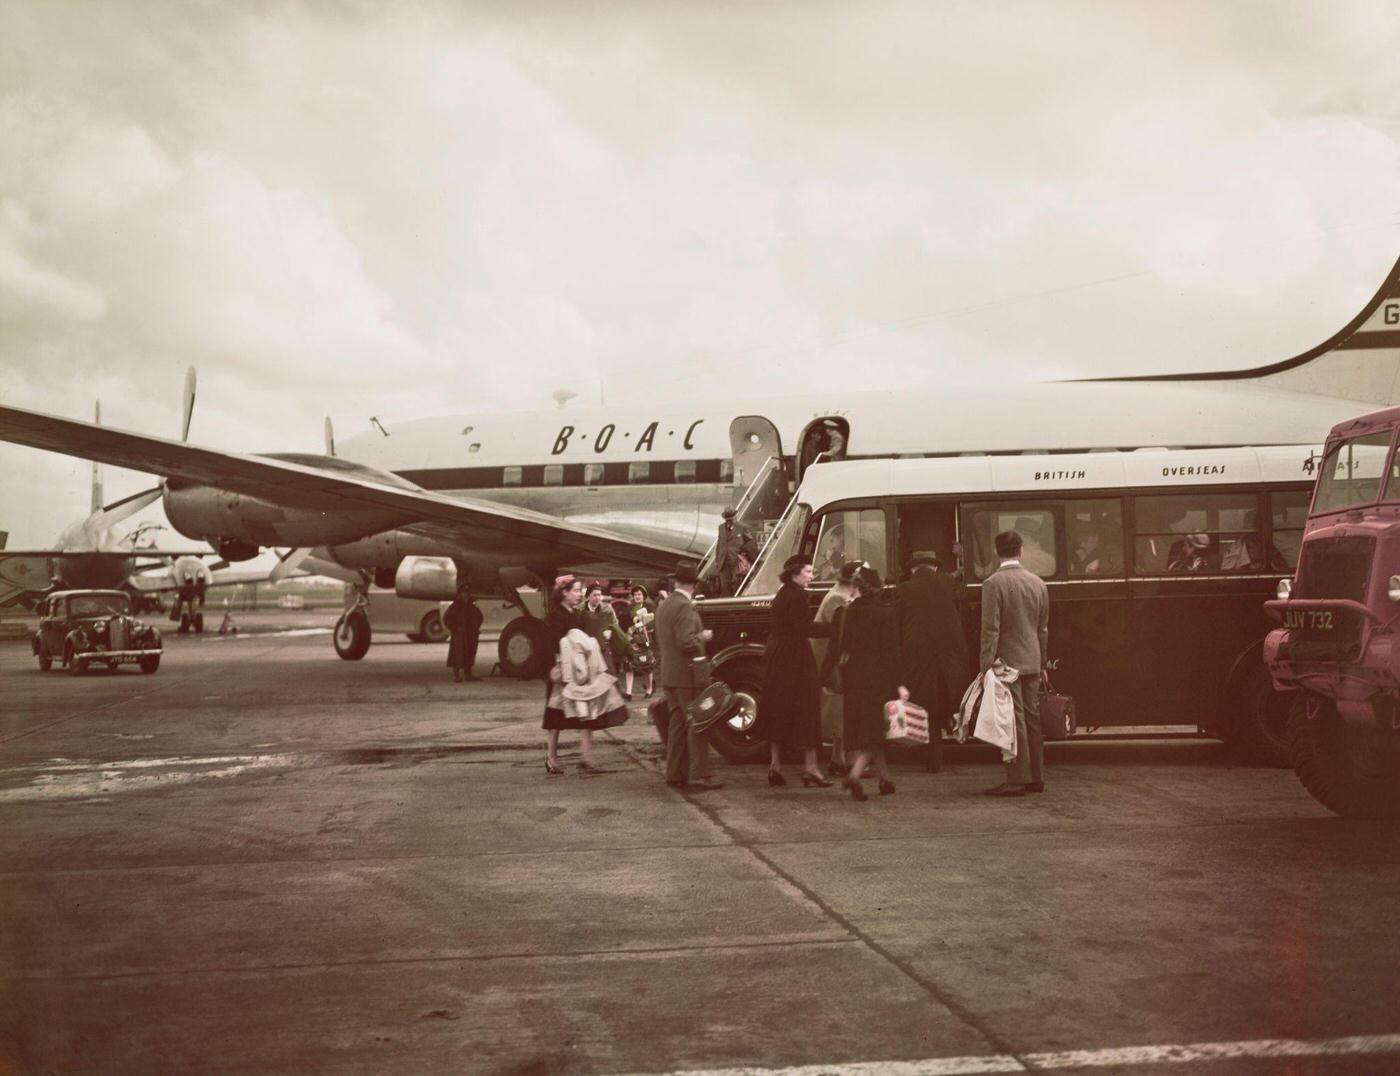 Passengers disembark from a British Overseas Airways Corporation (BOAC) Canadair C4 Argonaut aircraft onto a shuttle bus at London Airport in June 1951.